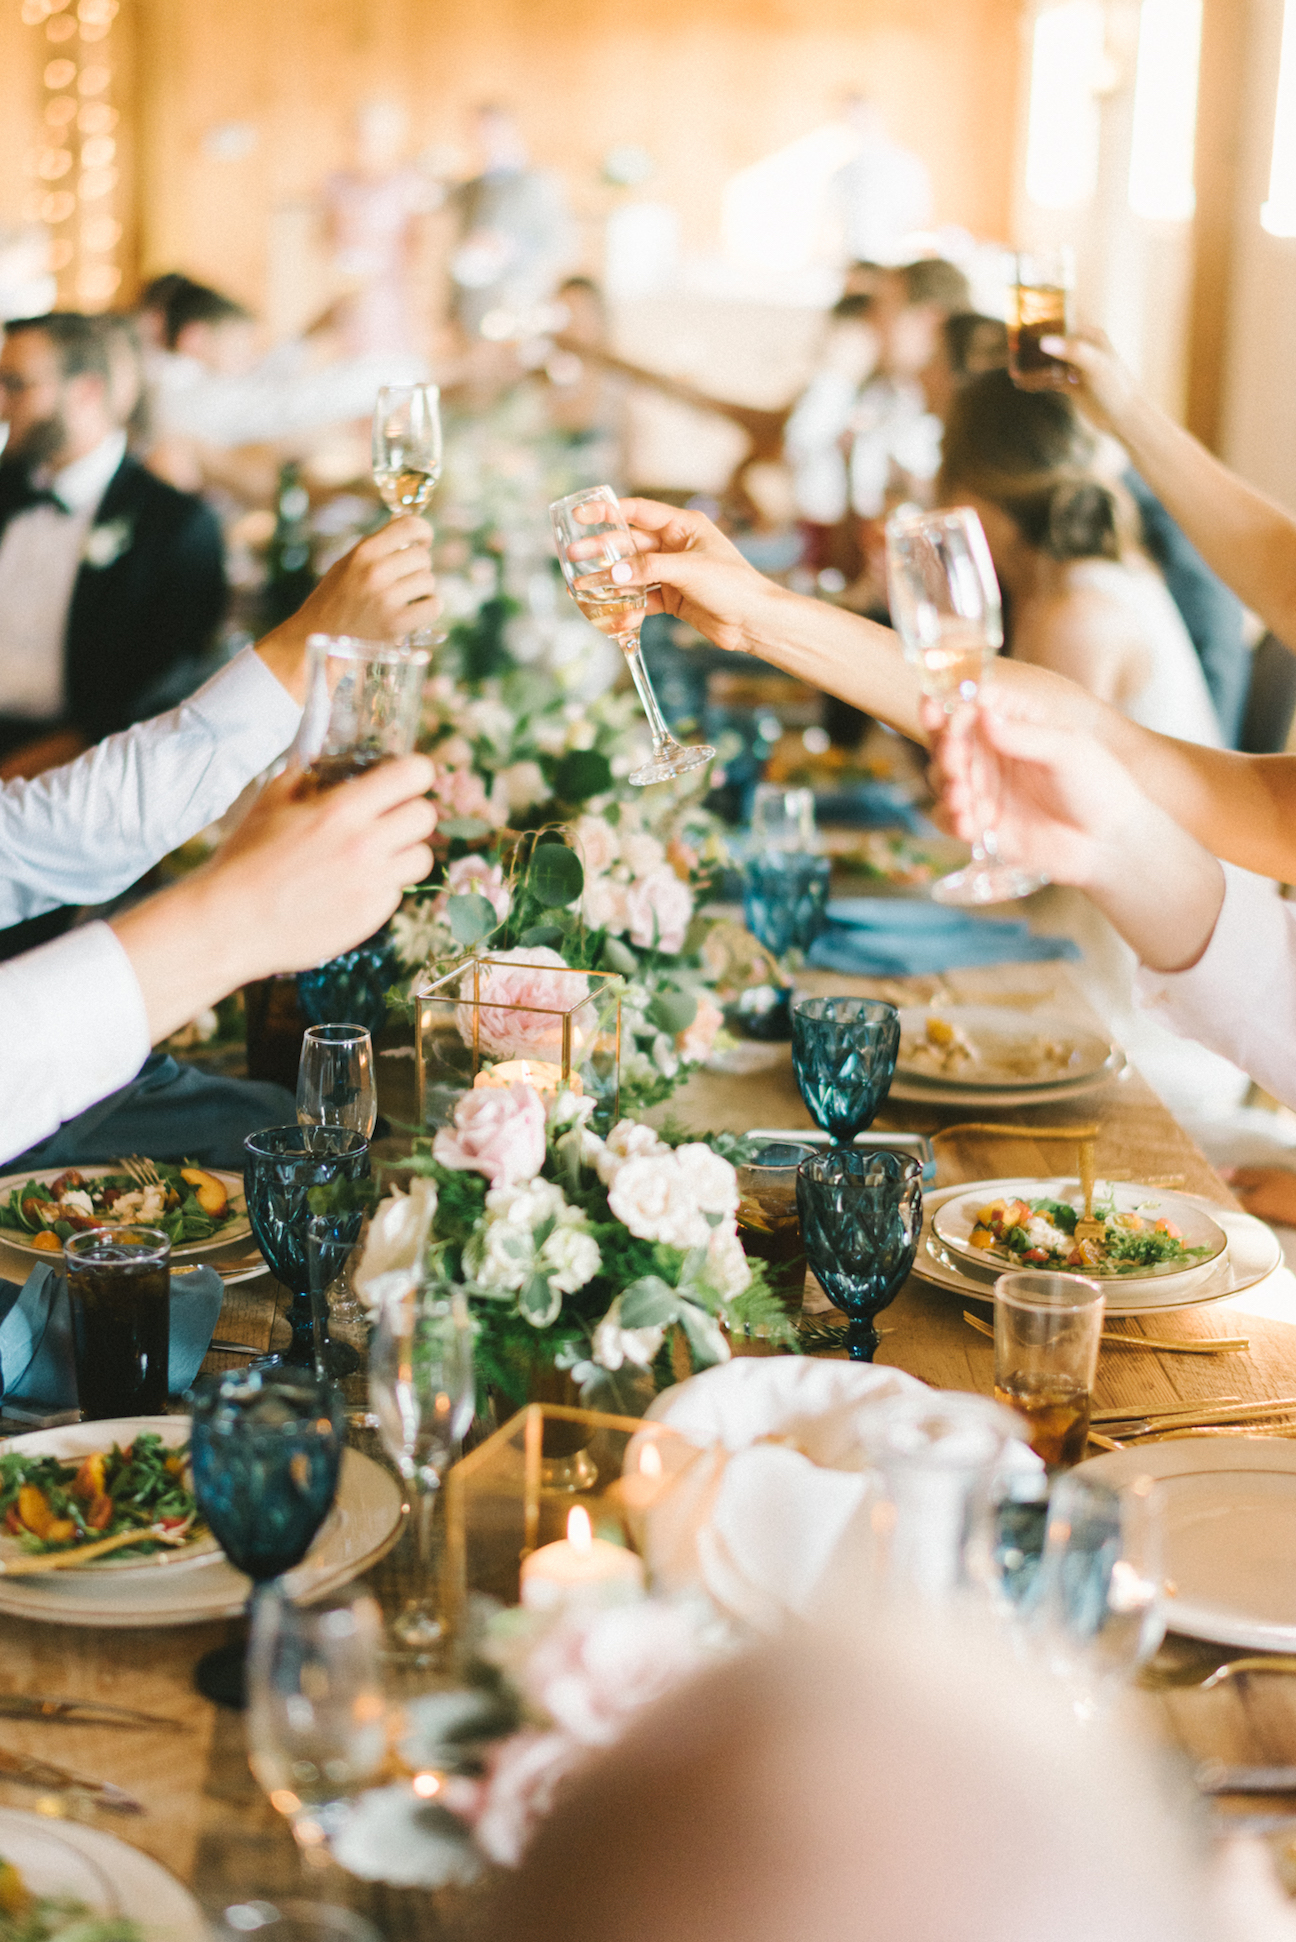 Guests at an indoor reception at a Shadow Creek wedding do a toast with their glasses over a long table